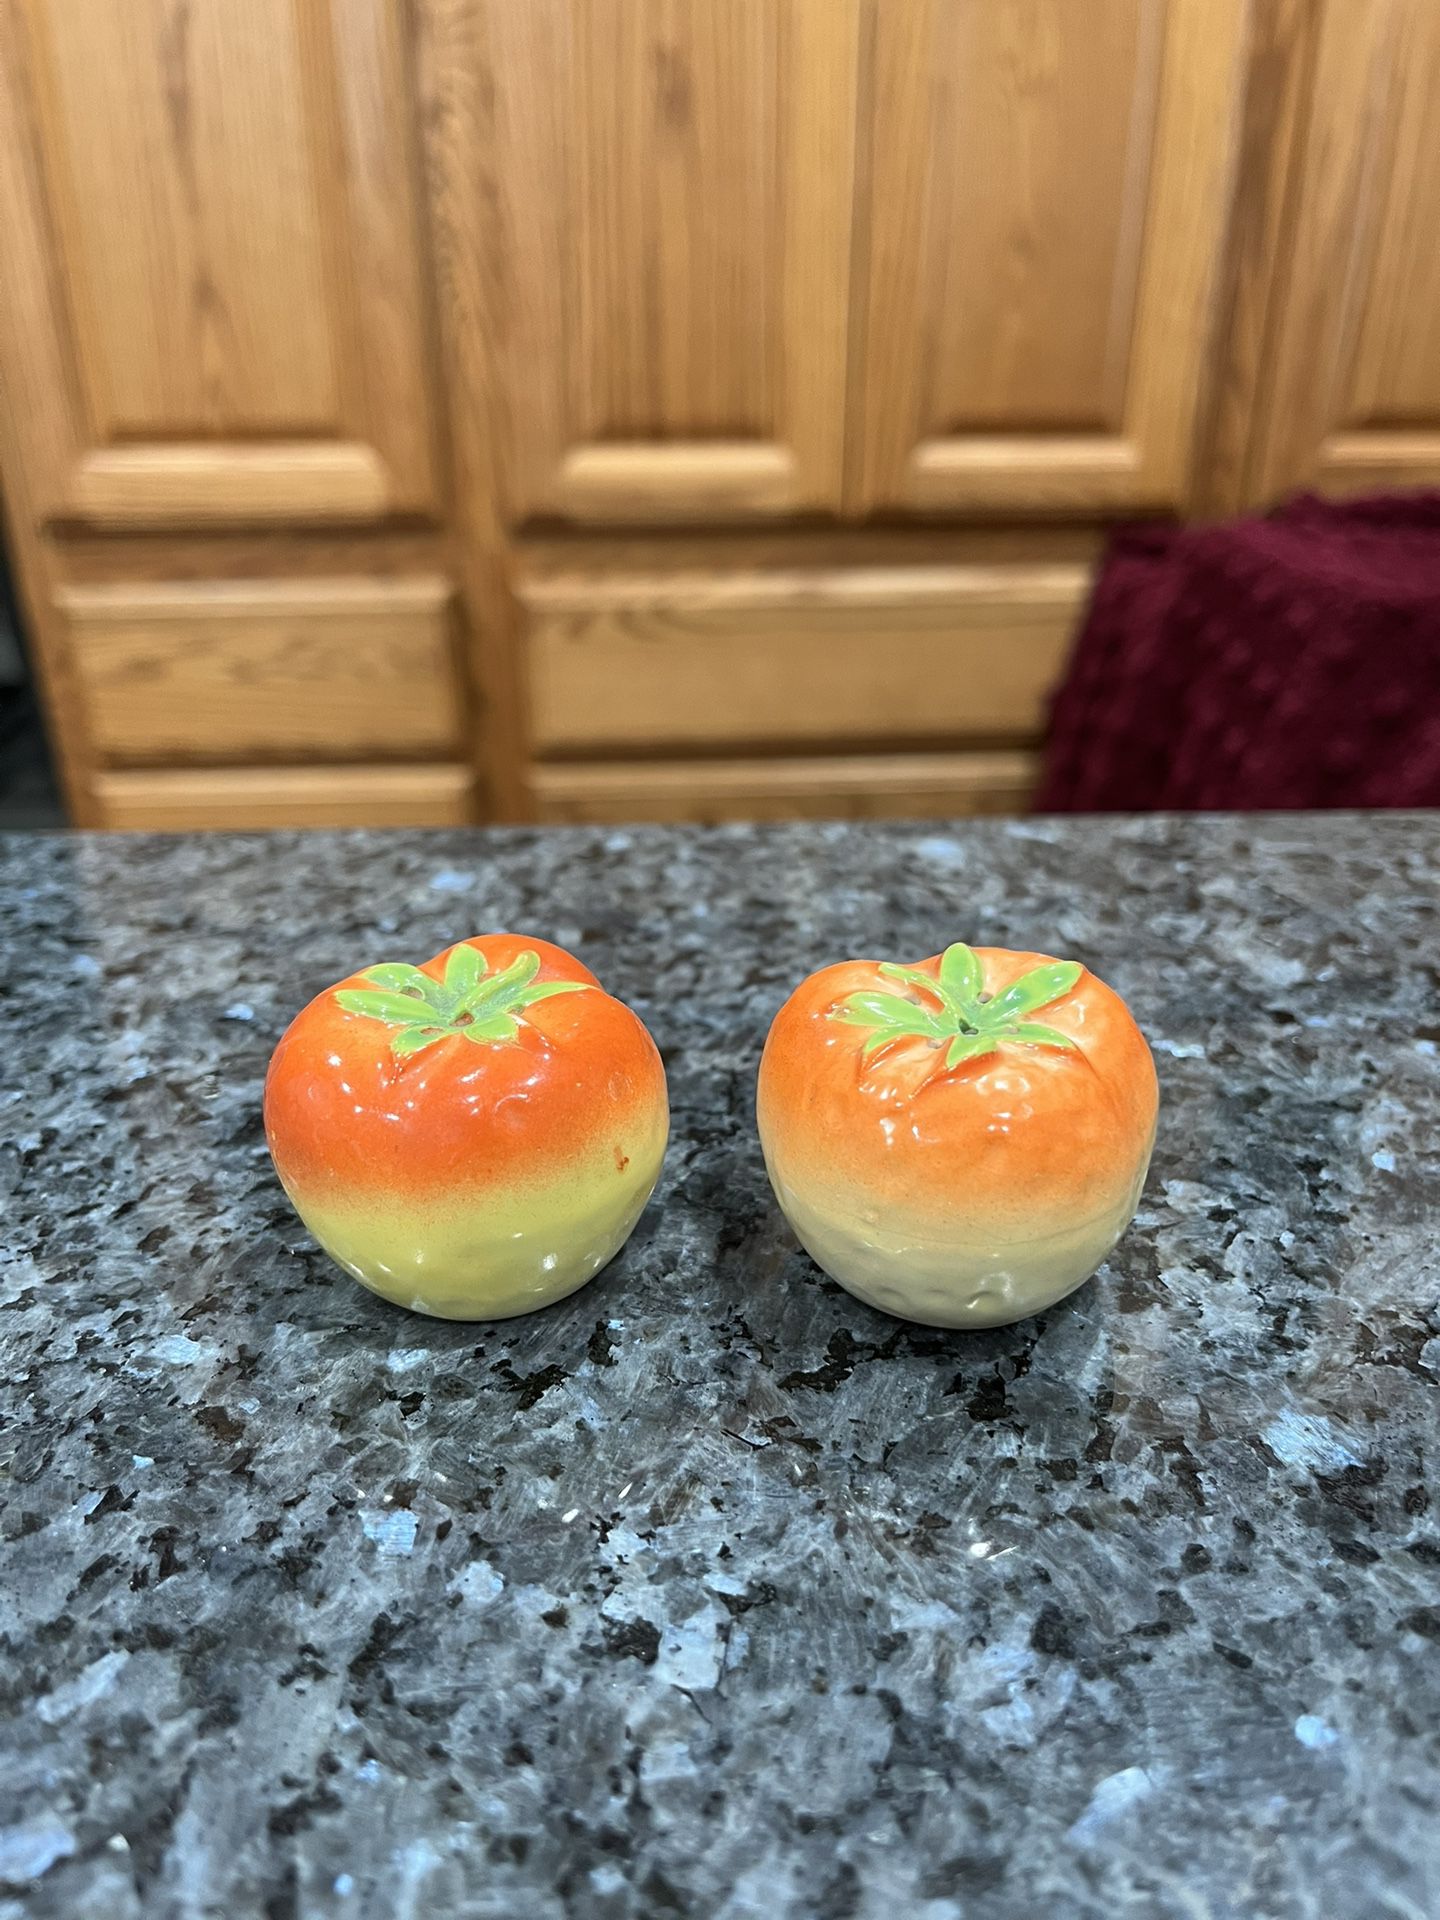 Vintage Tomato Pair Of Salt And Pepper Shakers.  Preowned Missing One Stopper 